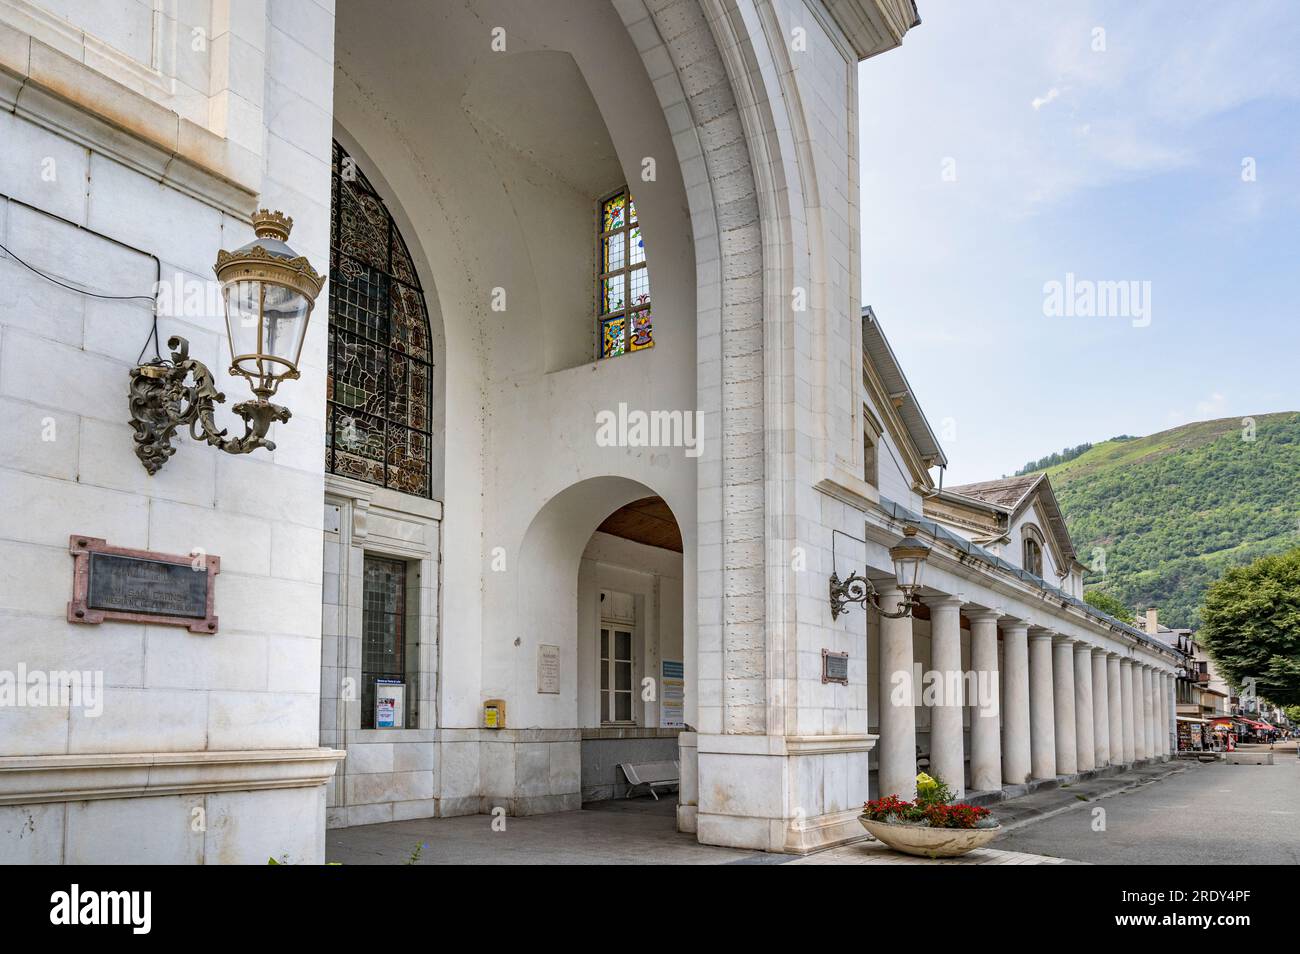 The thermal spa complex of Bagnères-de-Luchon boasts the strongest sulphuric sources in France. Stock Photo